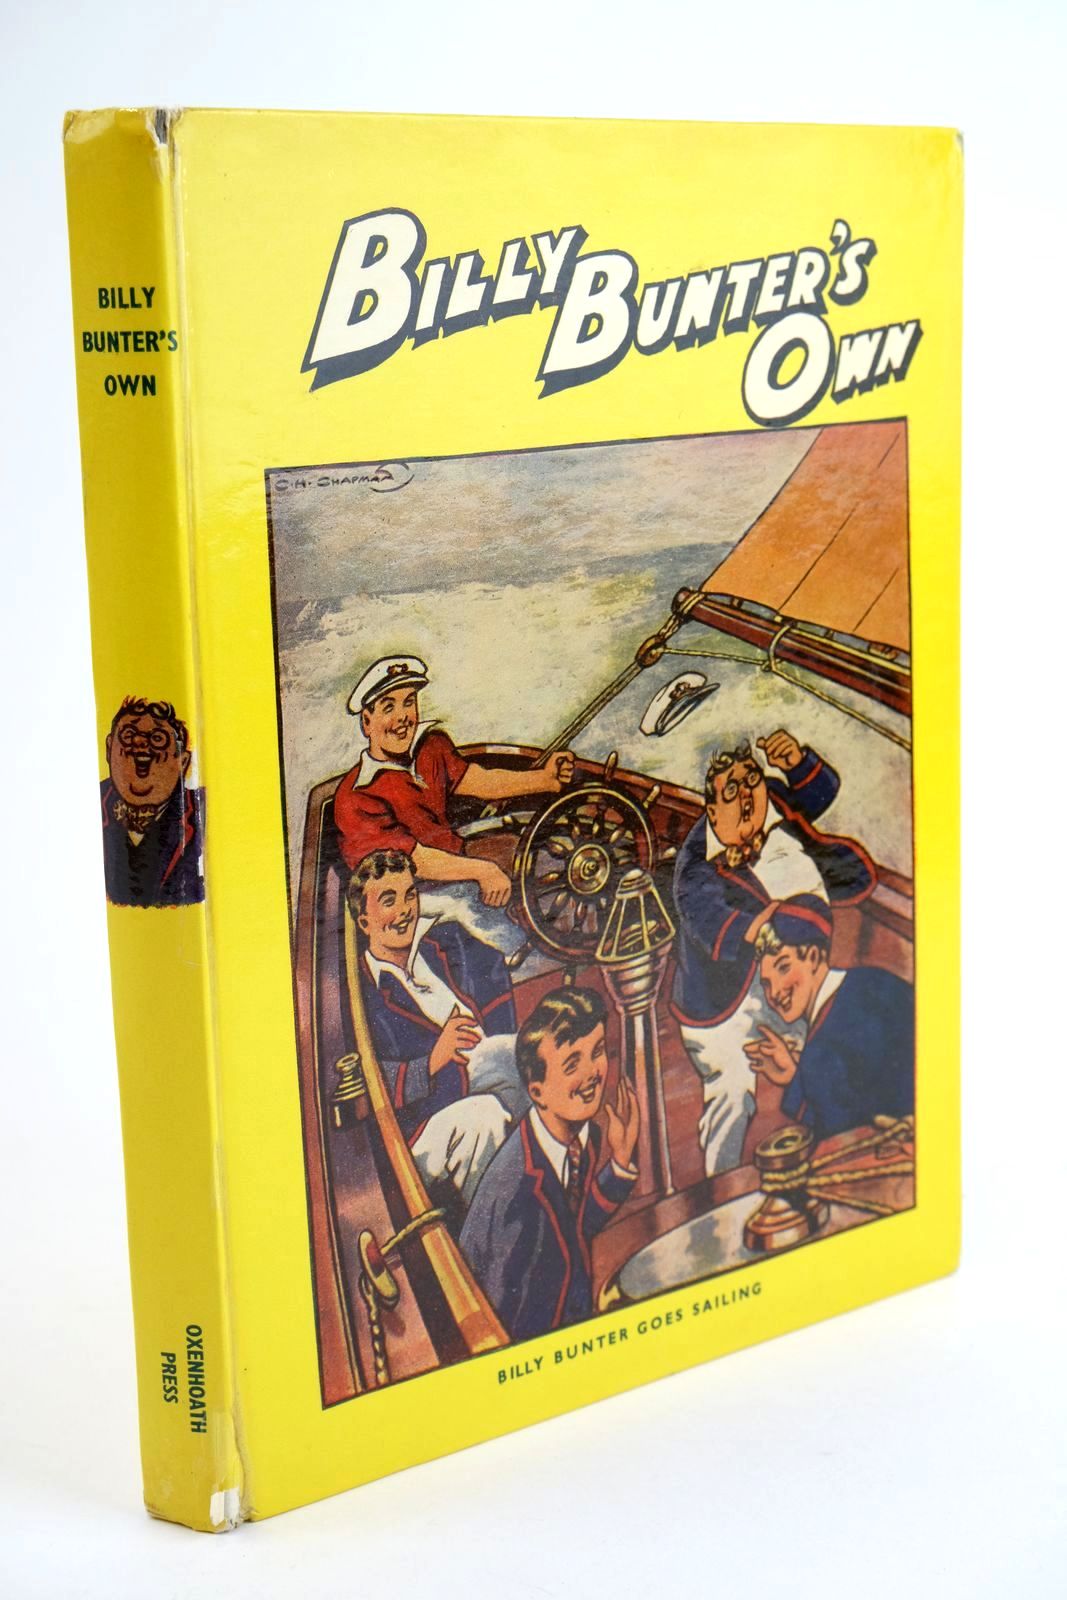 Photo of BILLY BUNTER'S OWN written by Richards, Frank published by Oxonhoath Press (STOCK CODE: 1323521)  for sale by Stella & Rose's Books